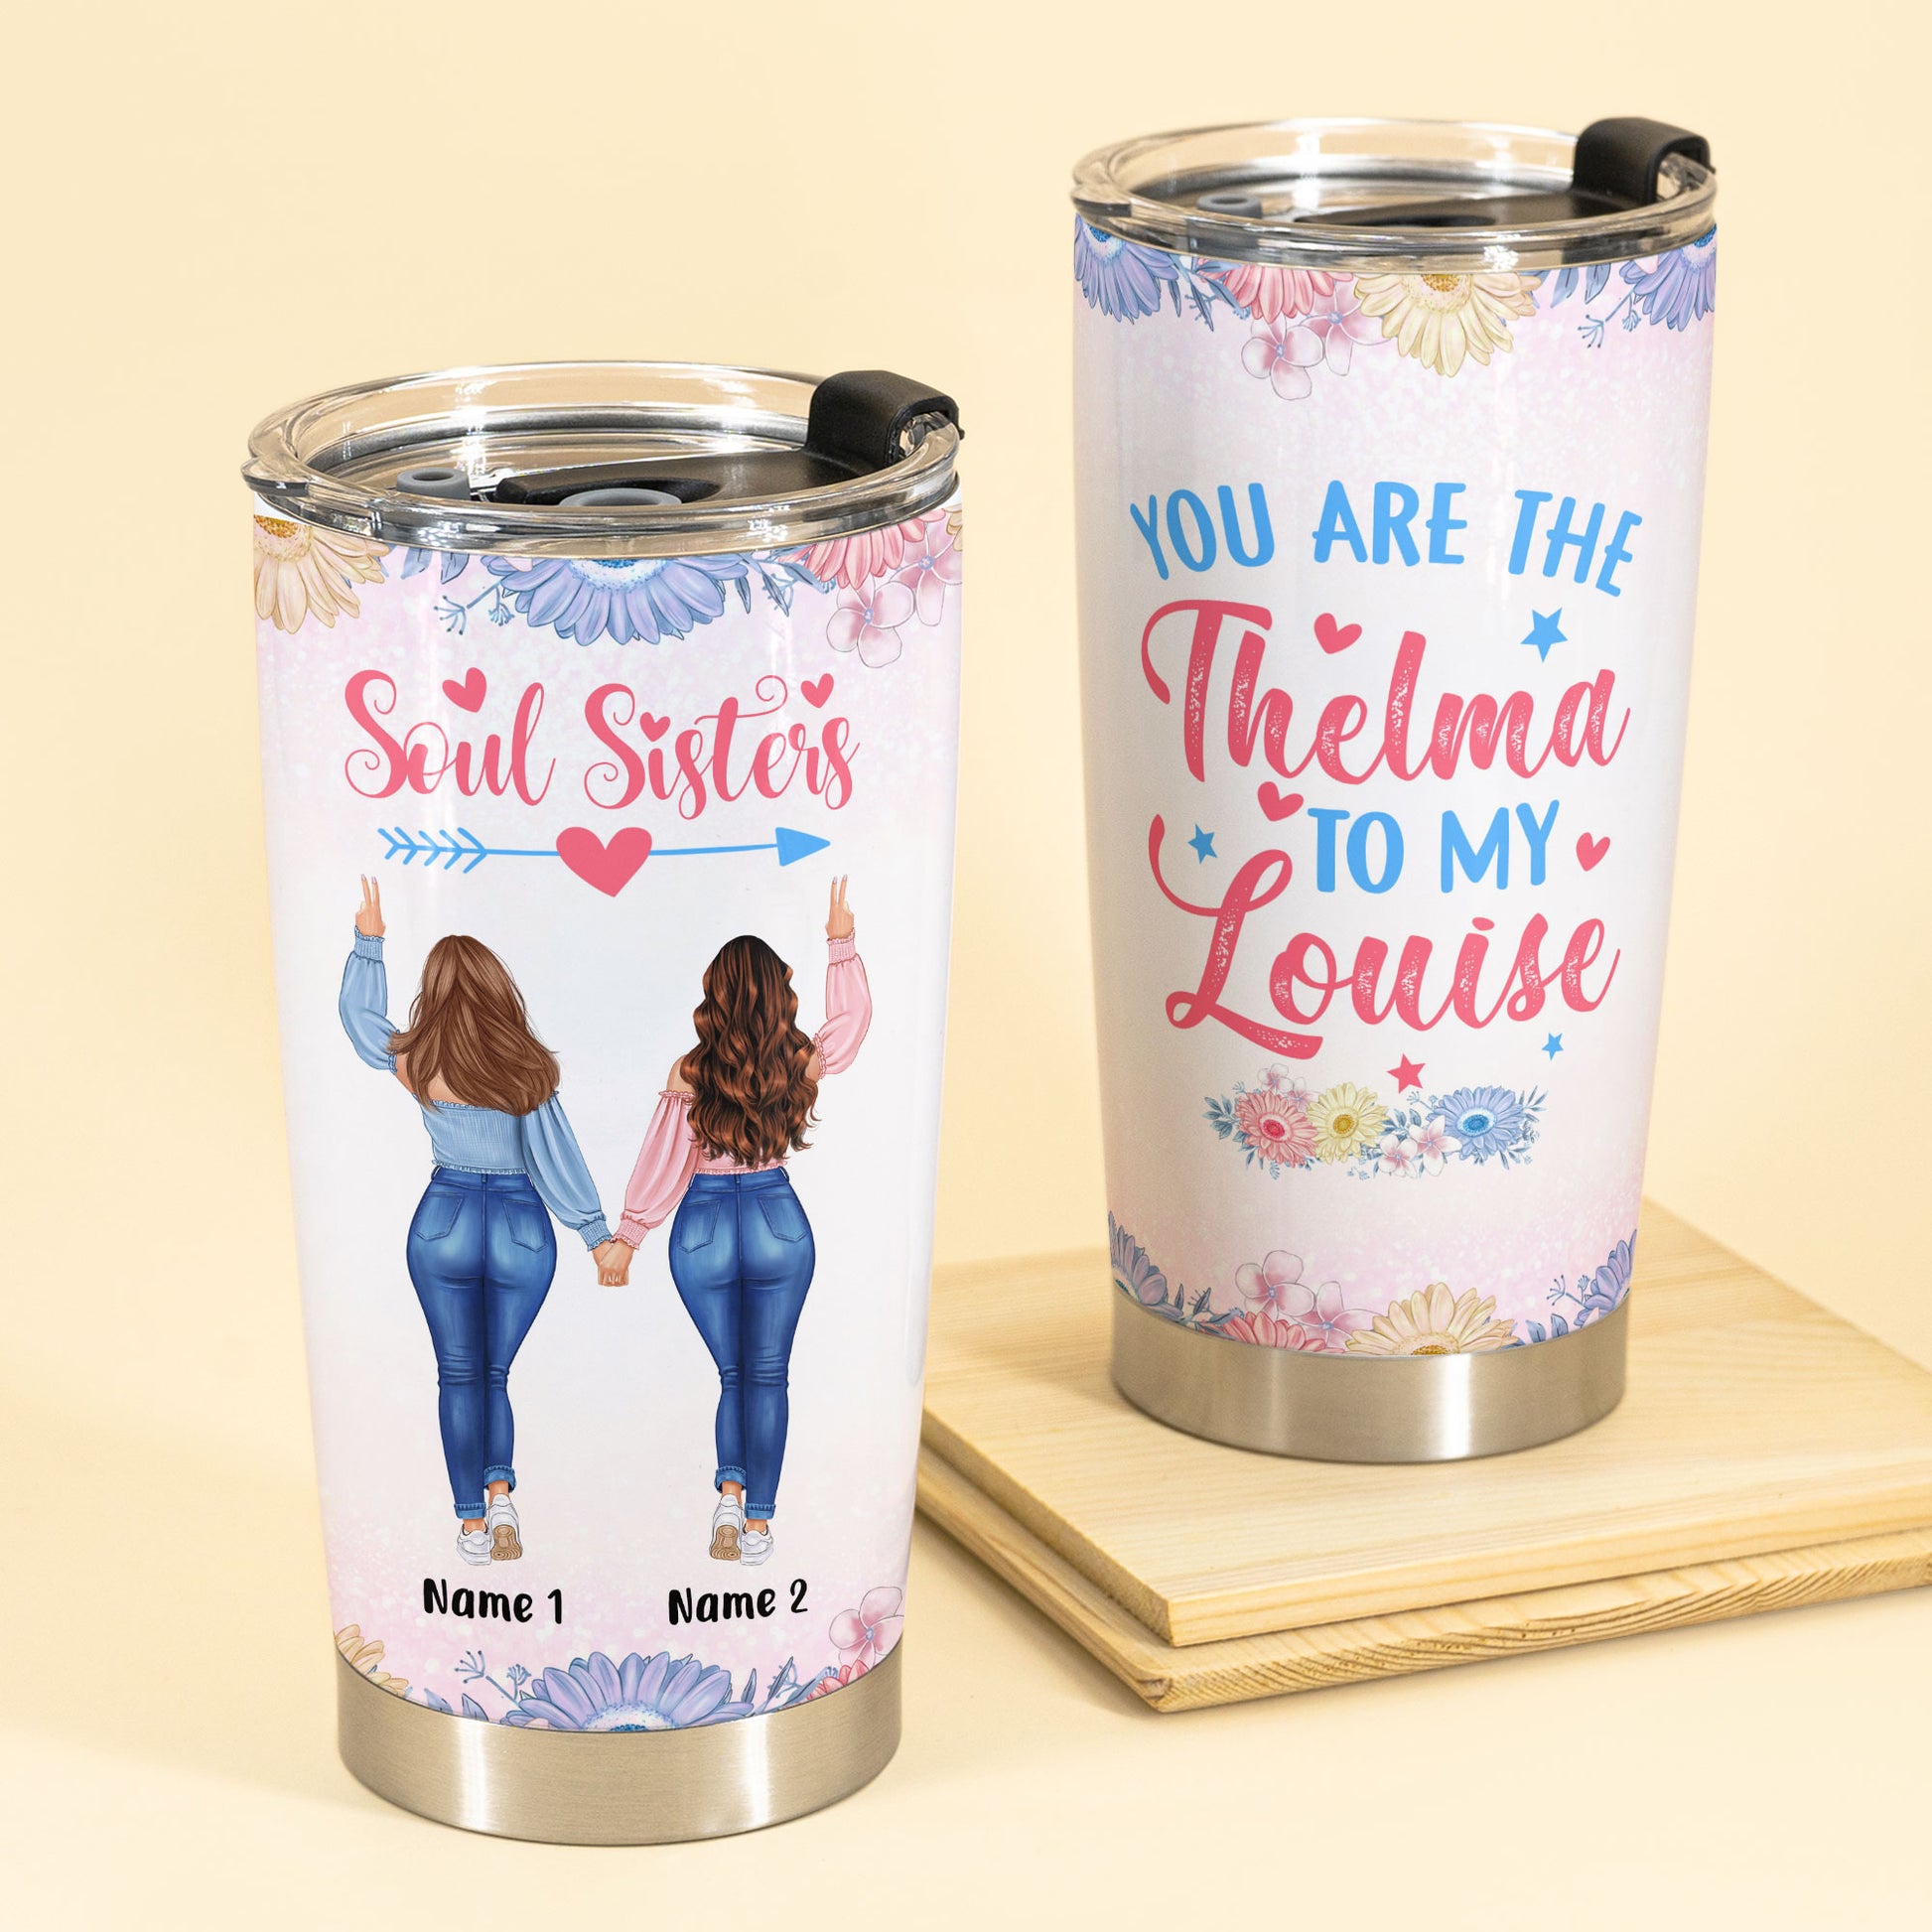 thelma and louise gifts